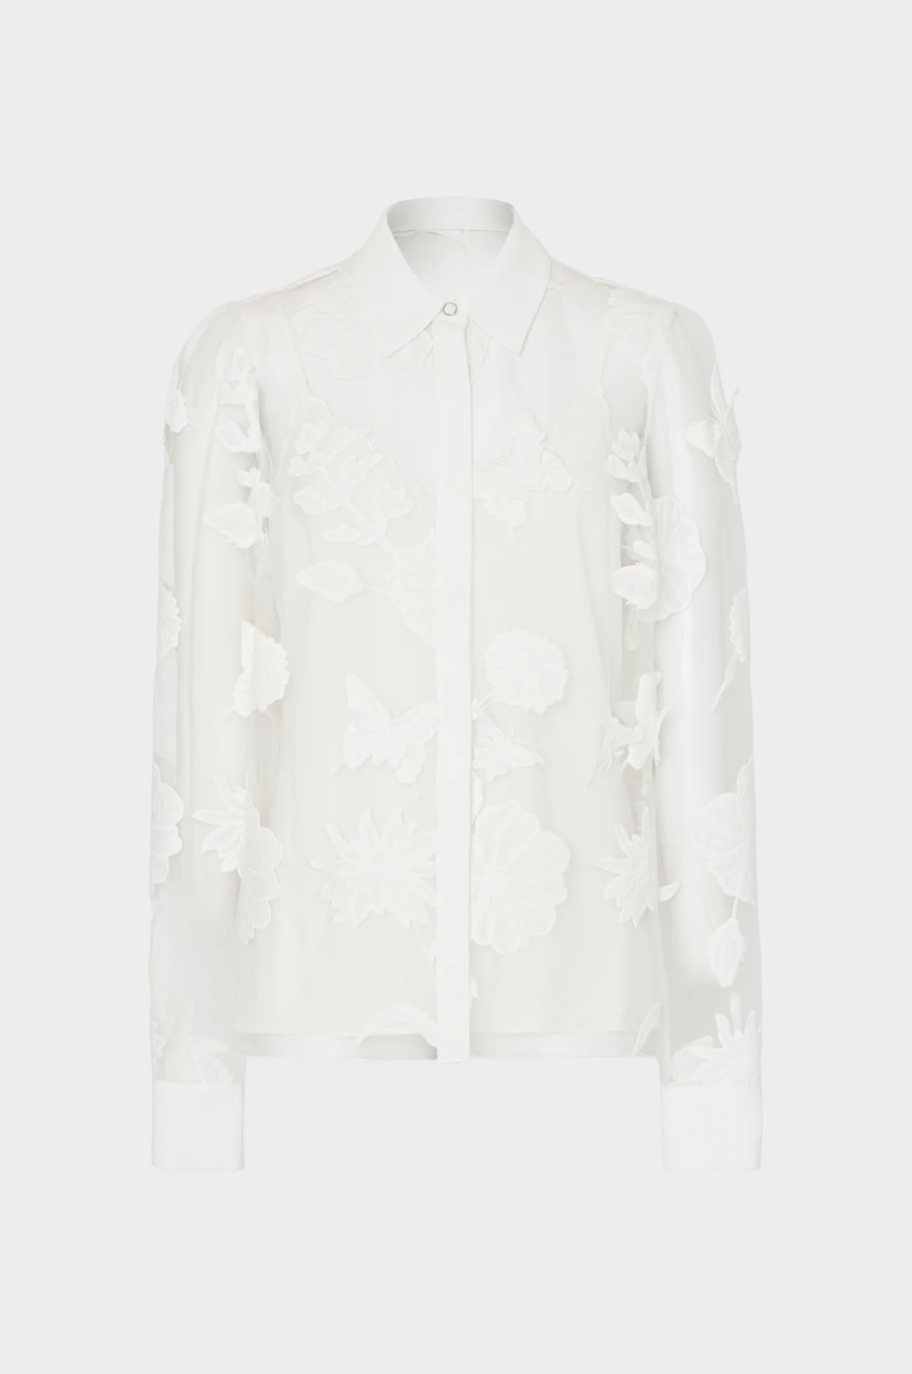 Ashton 3D Butterfly Embroidery Blouse